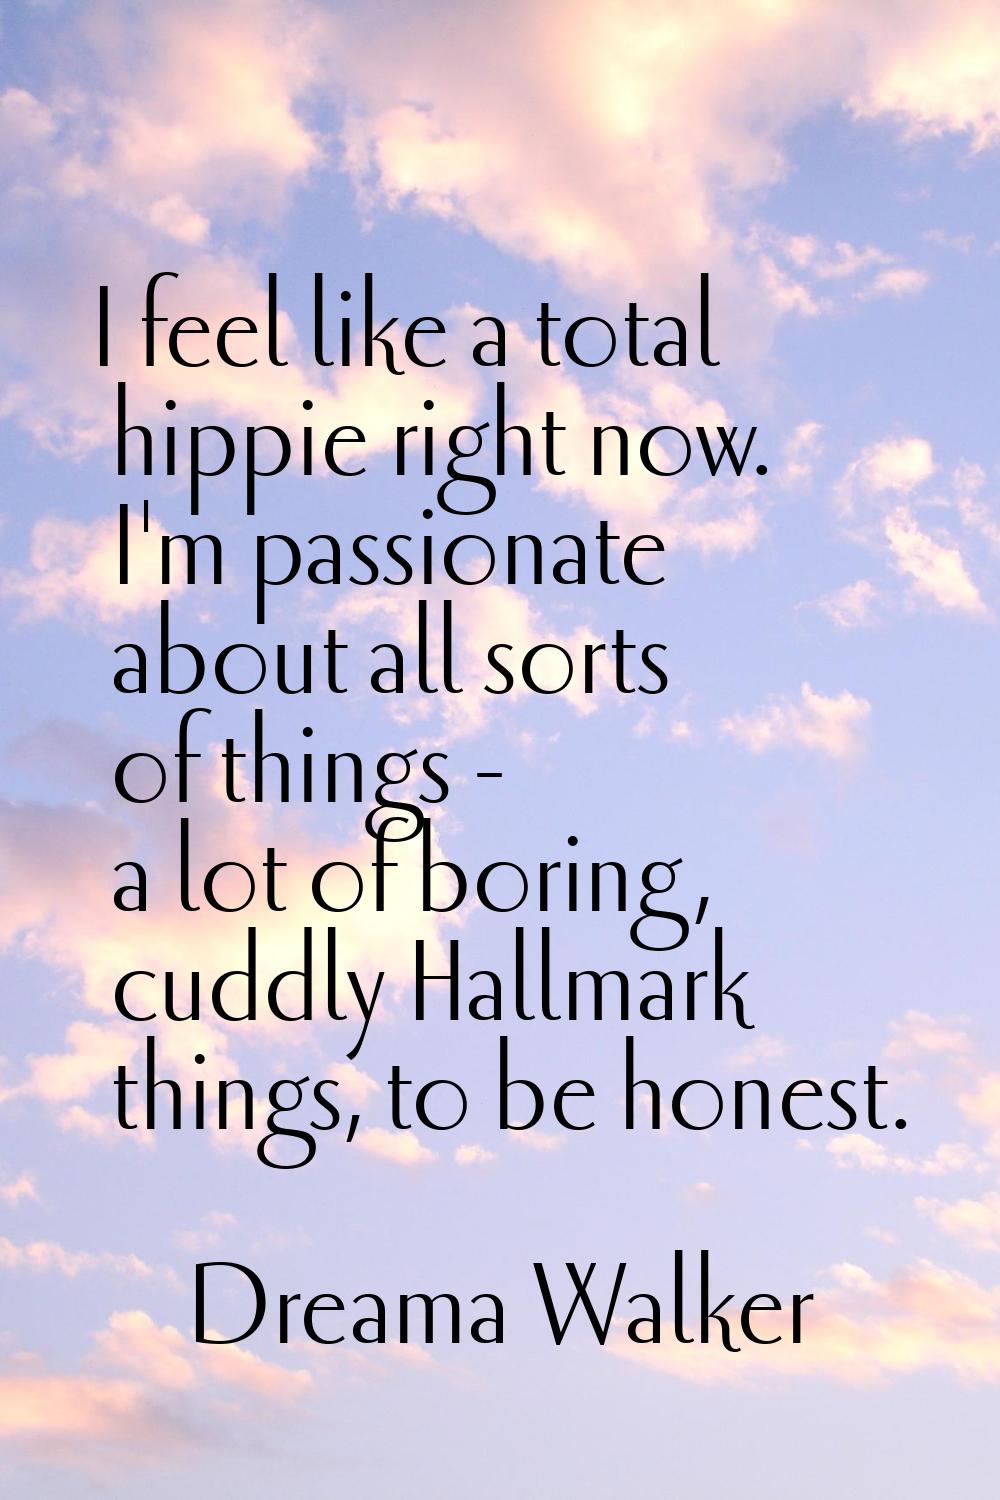 I feel like a total hippie right now. I'm passionate about all sorts of things - a lot of boring, c